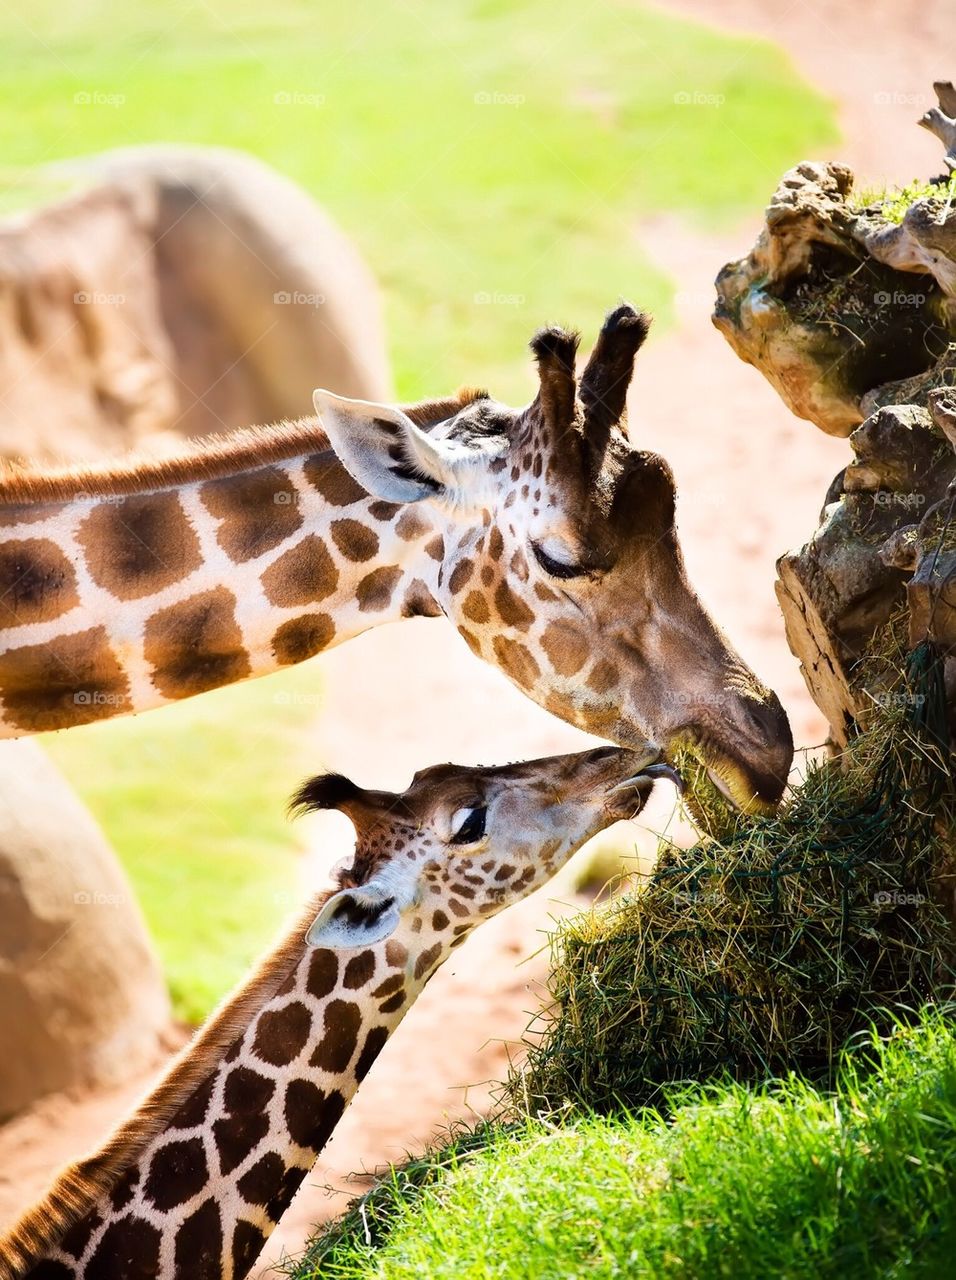 Giraffe and its young one eating grass